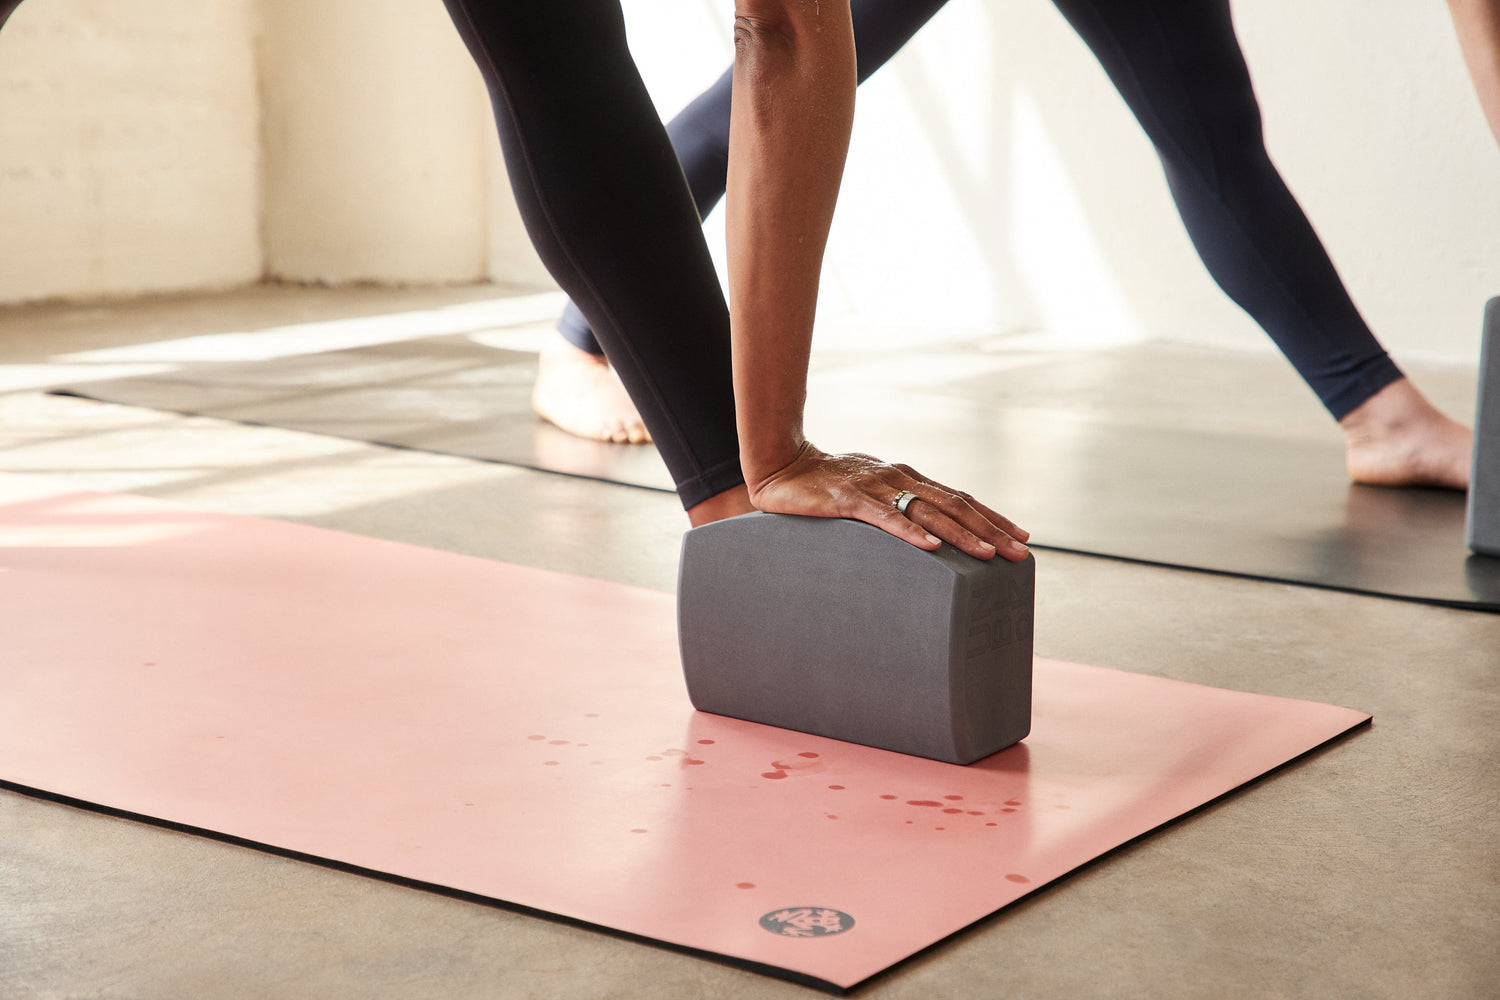 Manduka Yoga Foam Block Lightweight, Recycled Foam with Soft,  Slip-Resistant Surface, Exercise Accessory for Yoga, Pilates, Physical  Therapy, and General Fitness Midnight-Foam